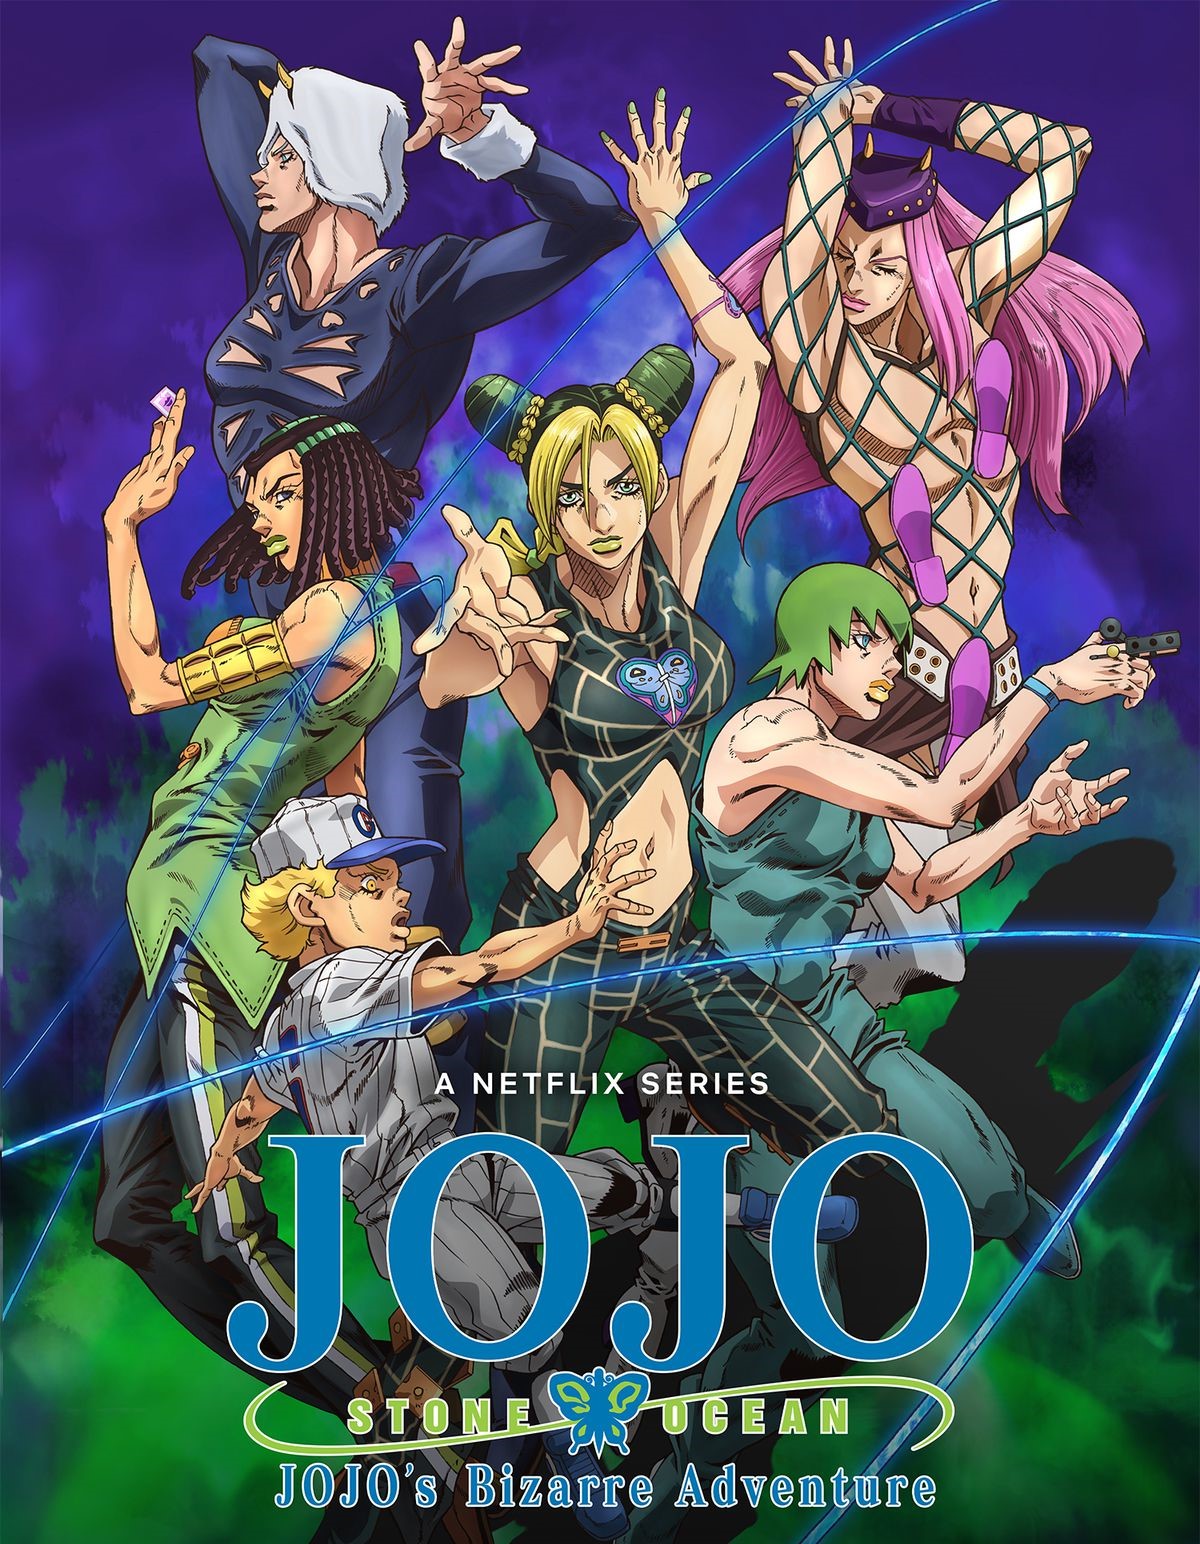 What Will Be The Next JoJo's Bizarre Adventure Anime Project?